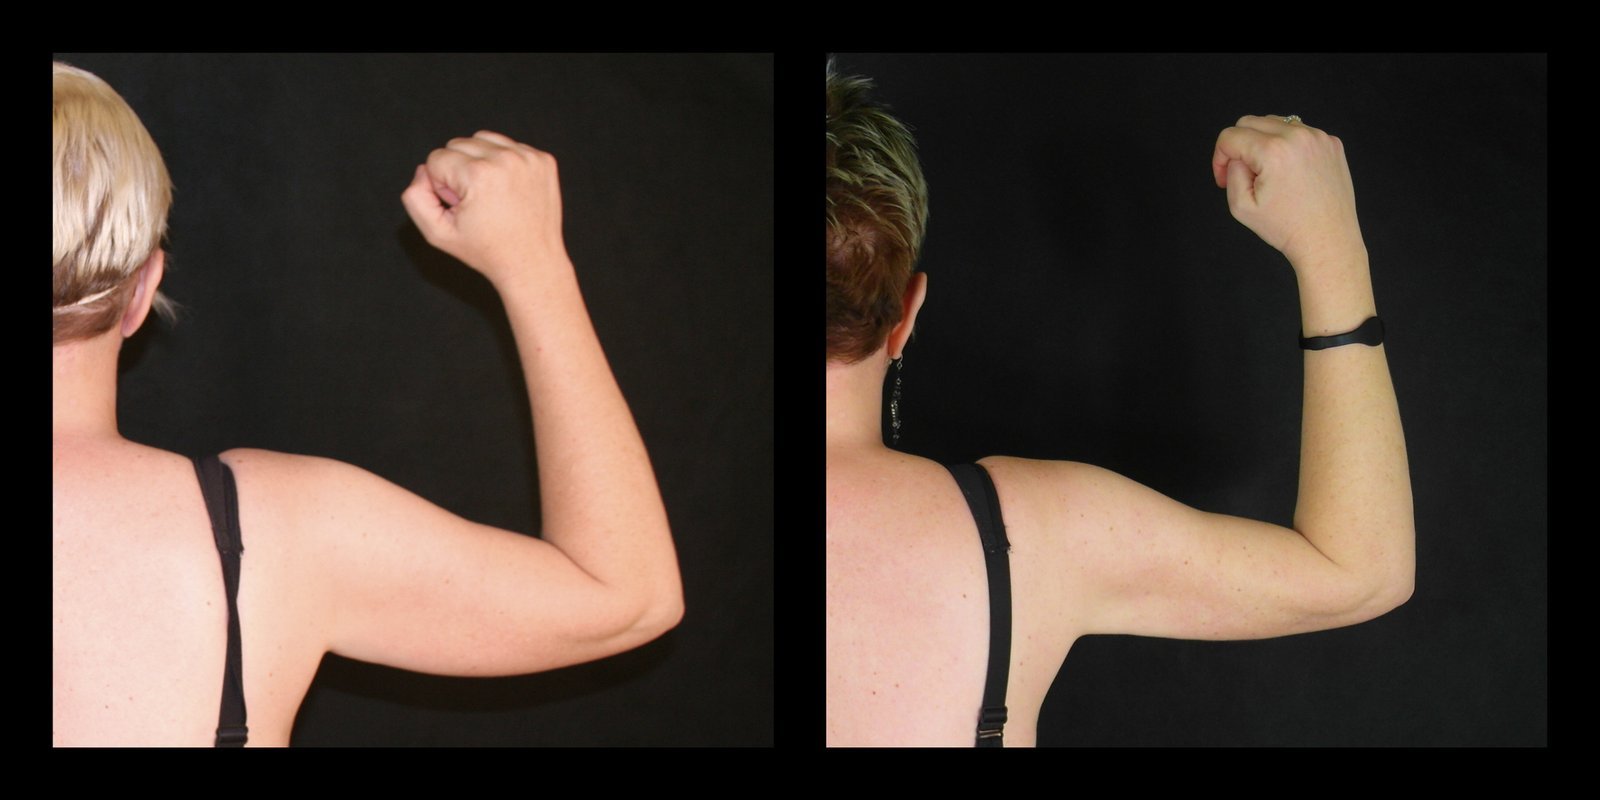 Is Liposuction the Answer to Armpit Fat Removal? - Art Lipo